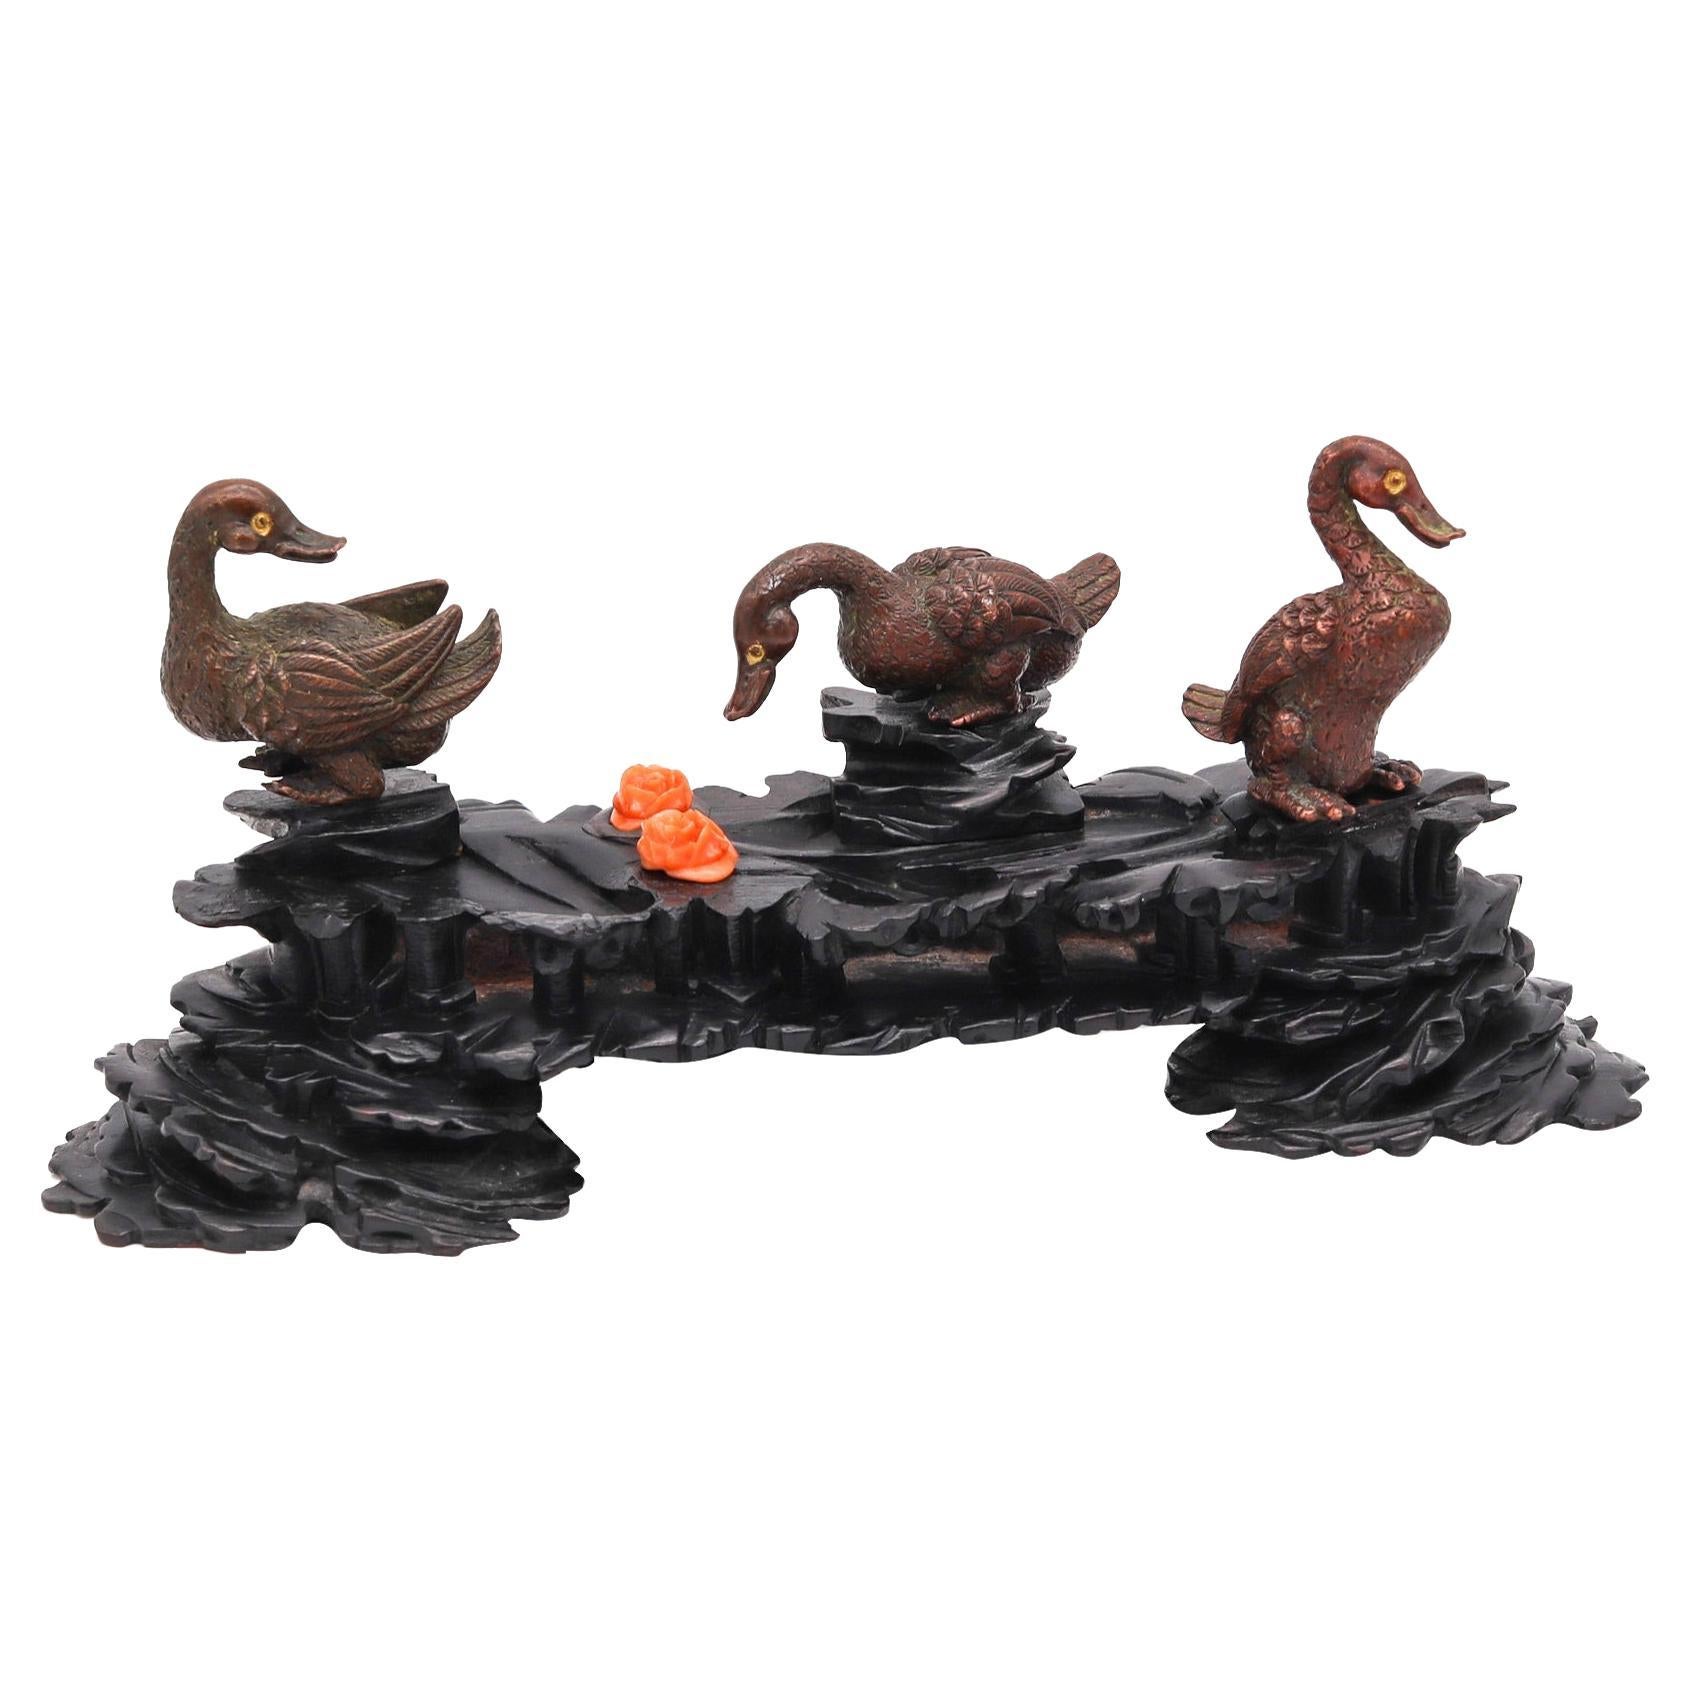 Japan Meiji 1900 Three Bronze Ducks Sculpture in Wood Stand and Coral